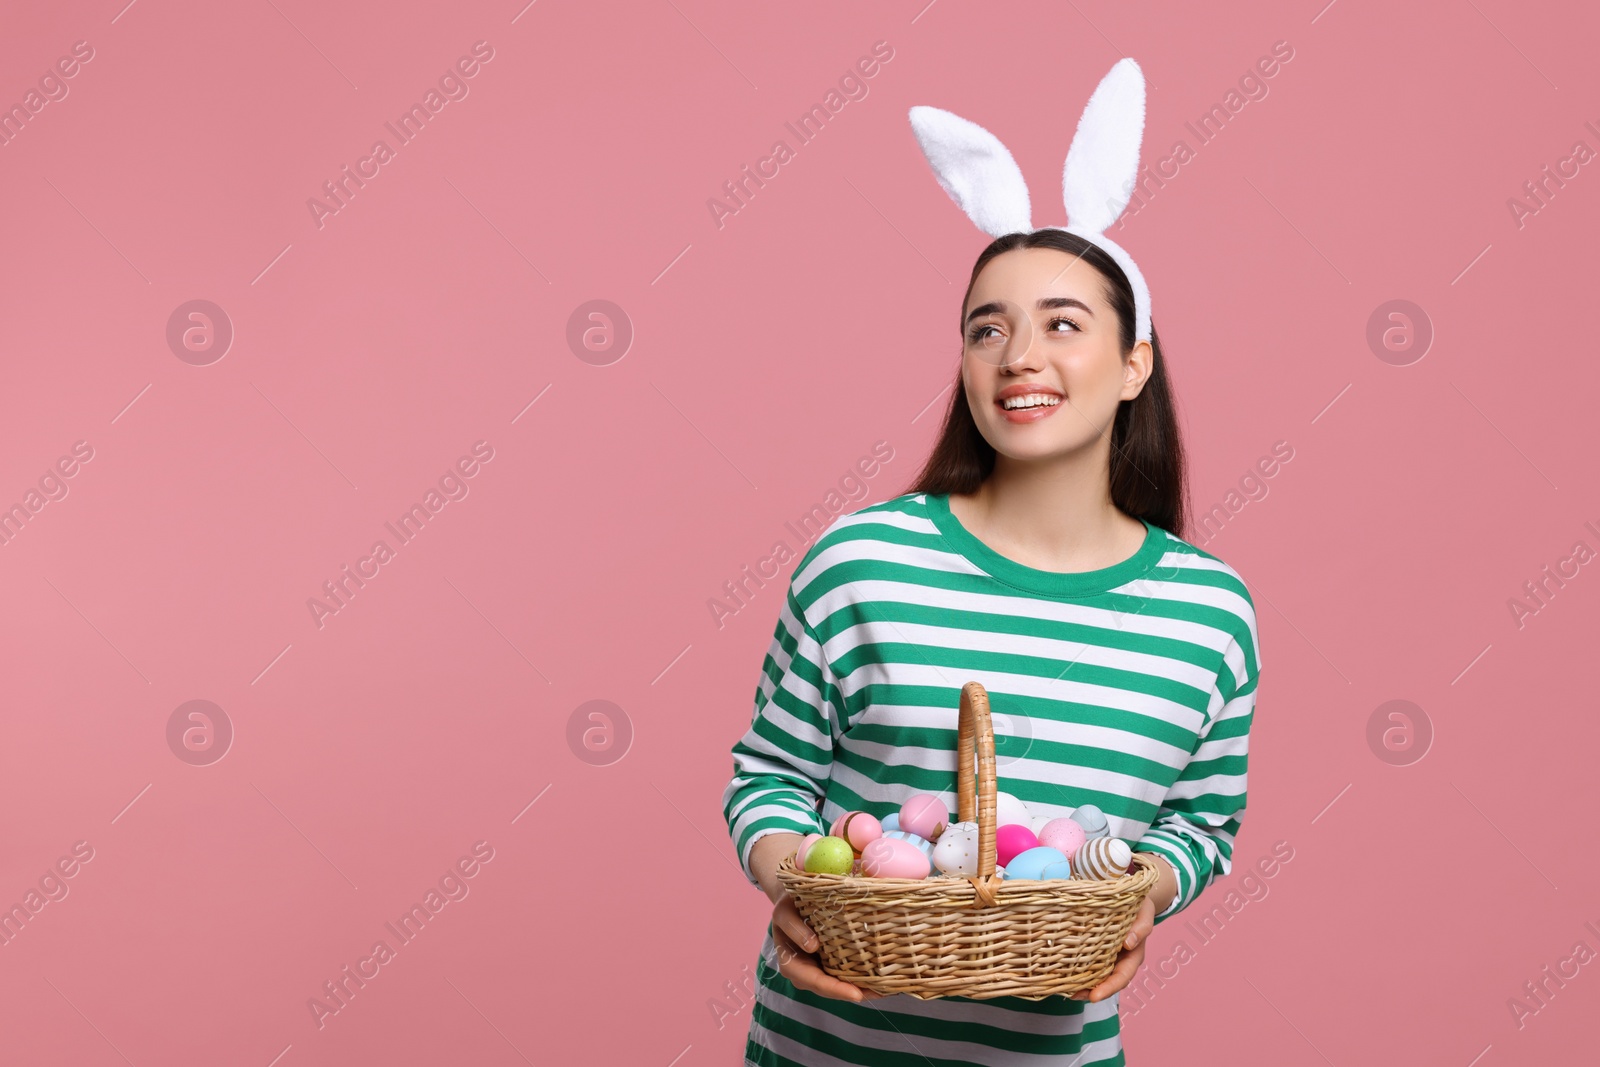 Photo of Happy woman in bunny ears headband holding wicker basket of painted Easter eggs on pink background. Space for text